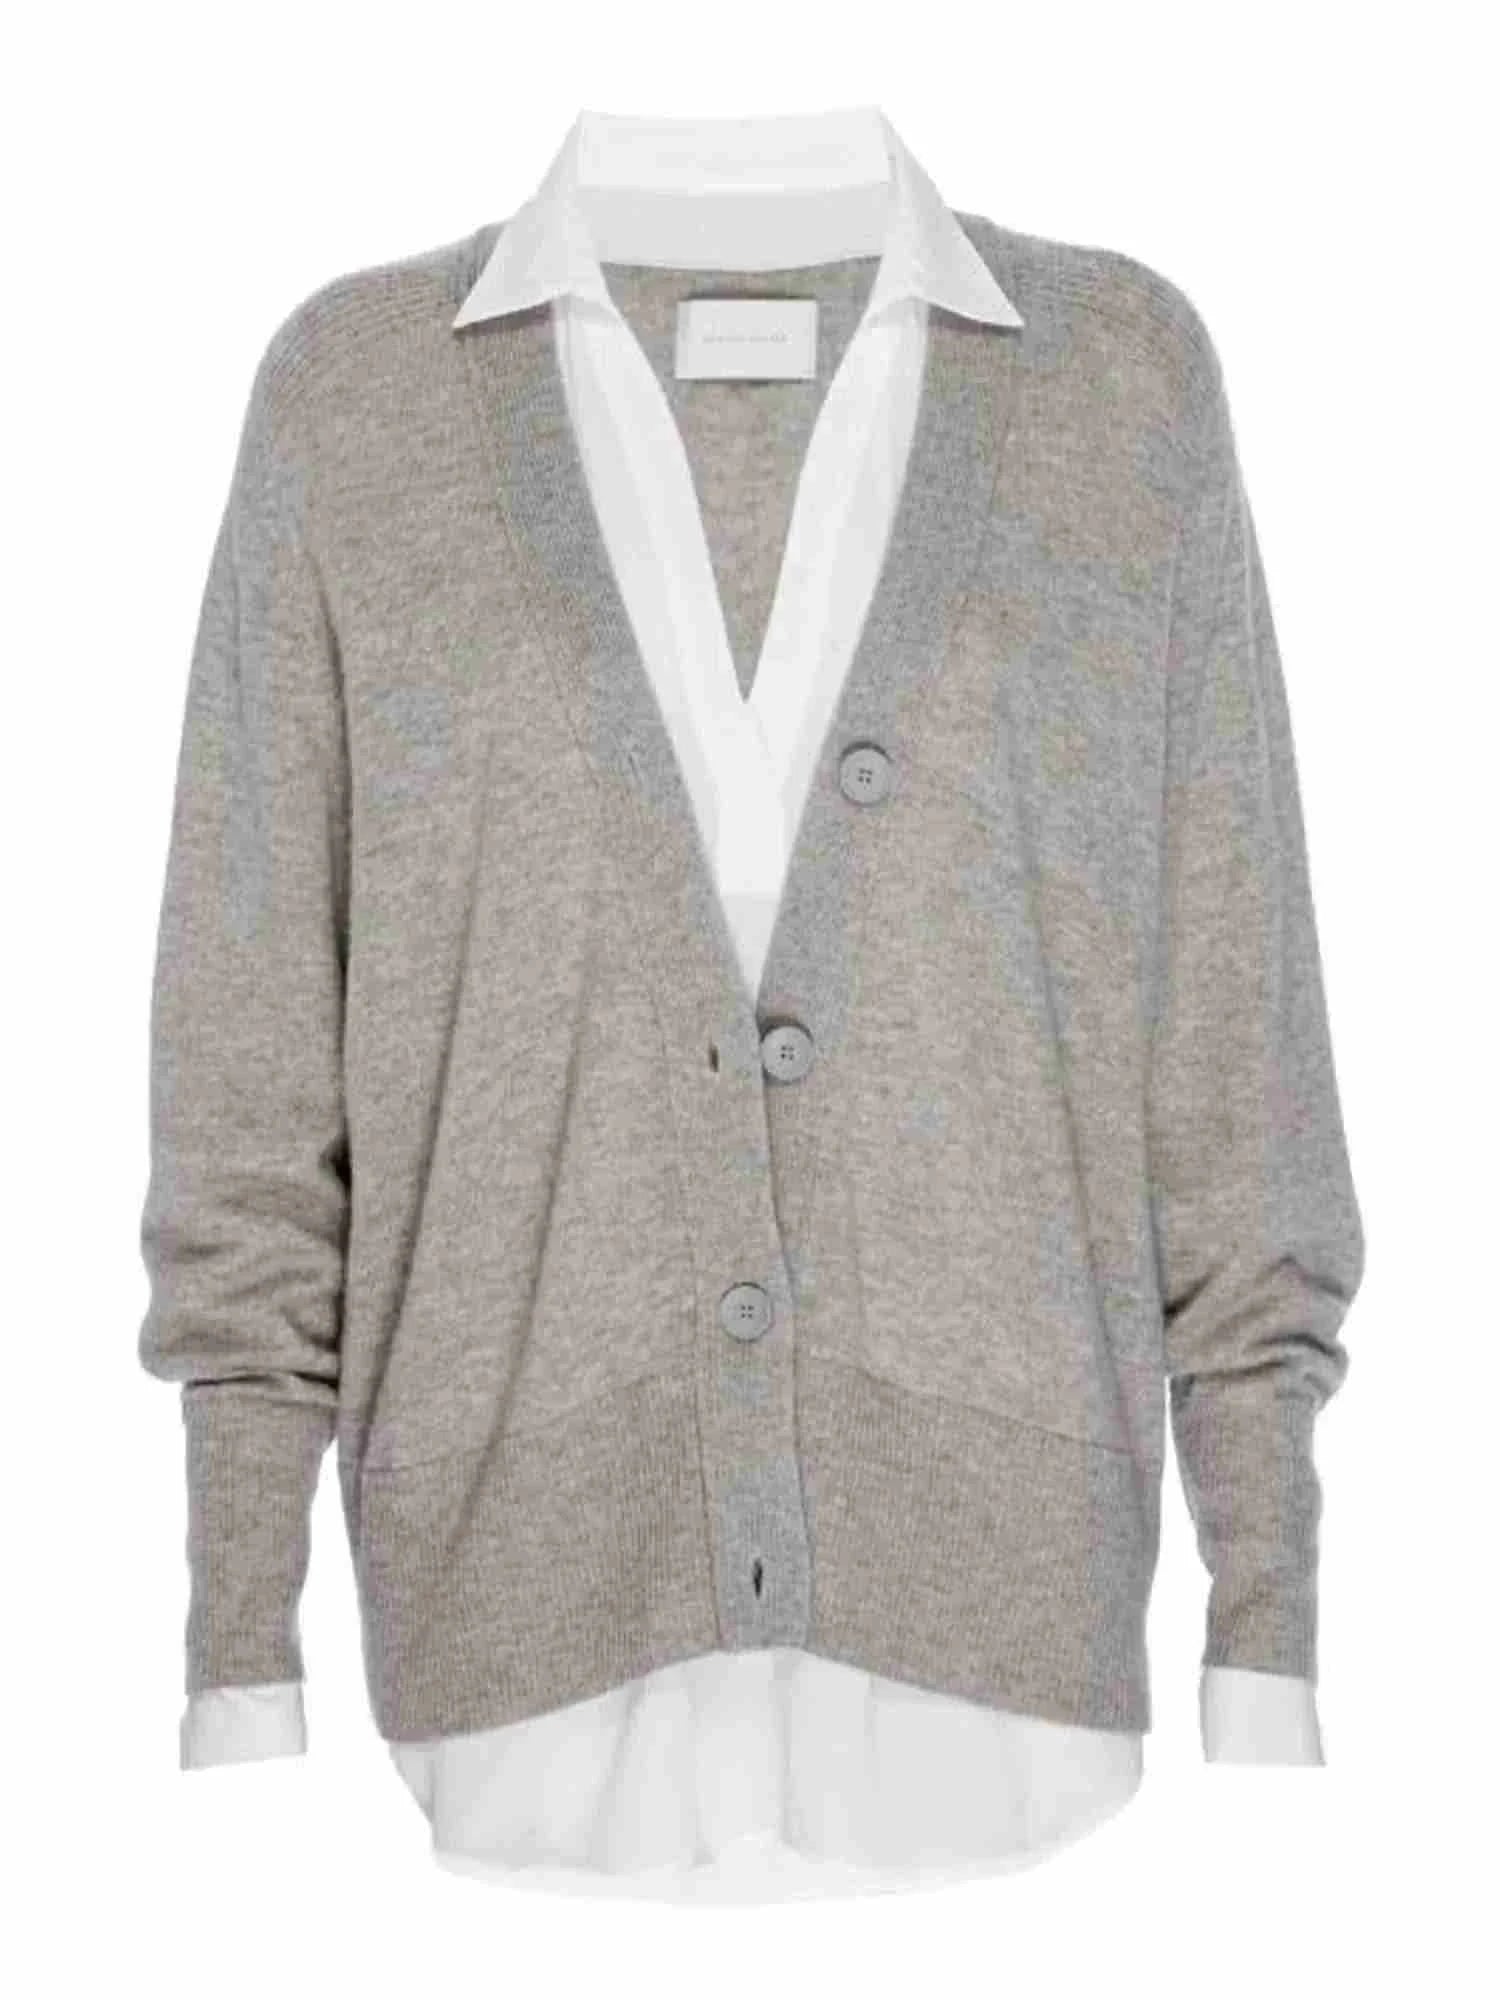 THE CALLIE LAYERED LOOKER CARDIGAN